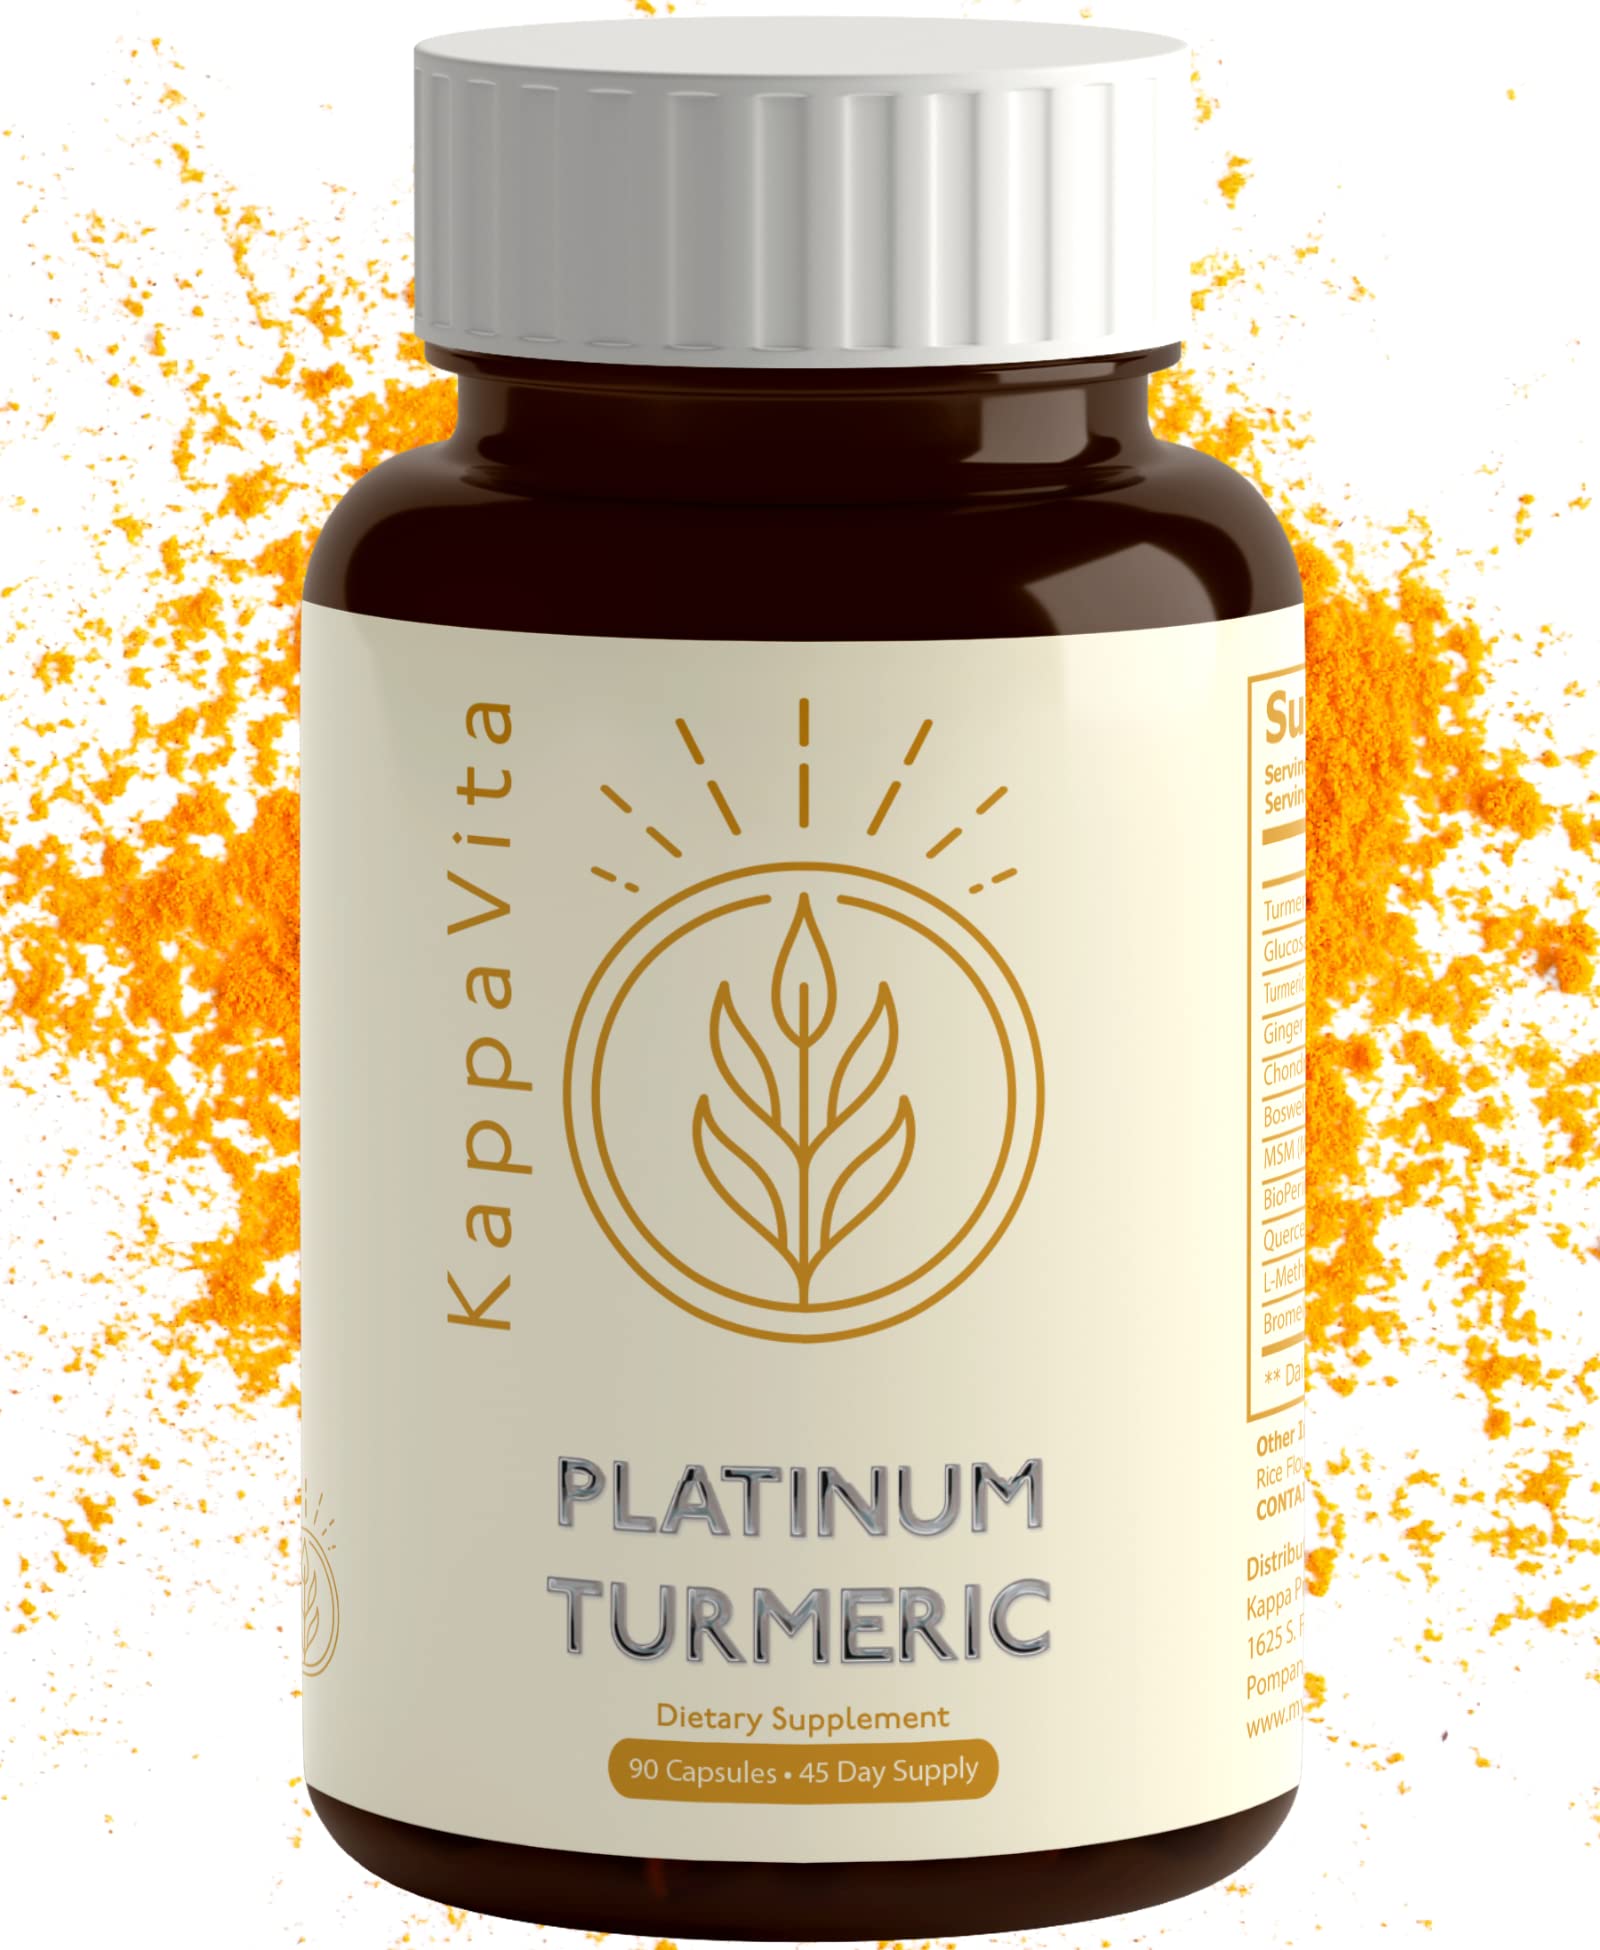 Turmeric Curcumin with Bioperine Ginger and Glucosamine - Natural Joint Support with 95% Standardized Curcuminoids for Maximum Potency & Absorption